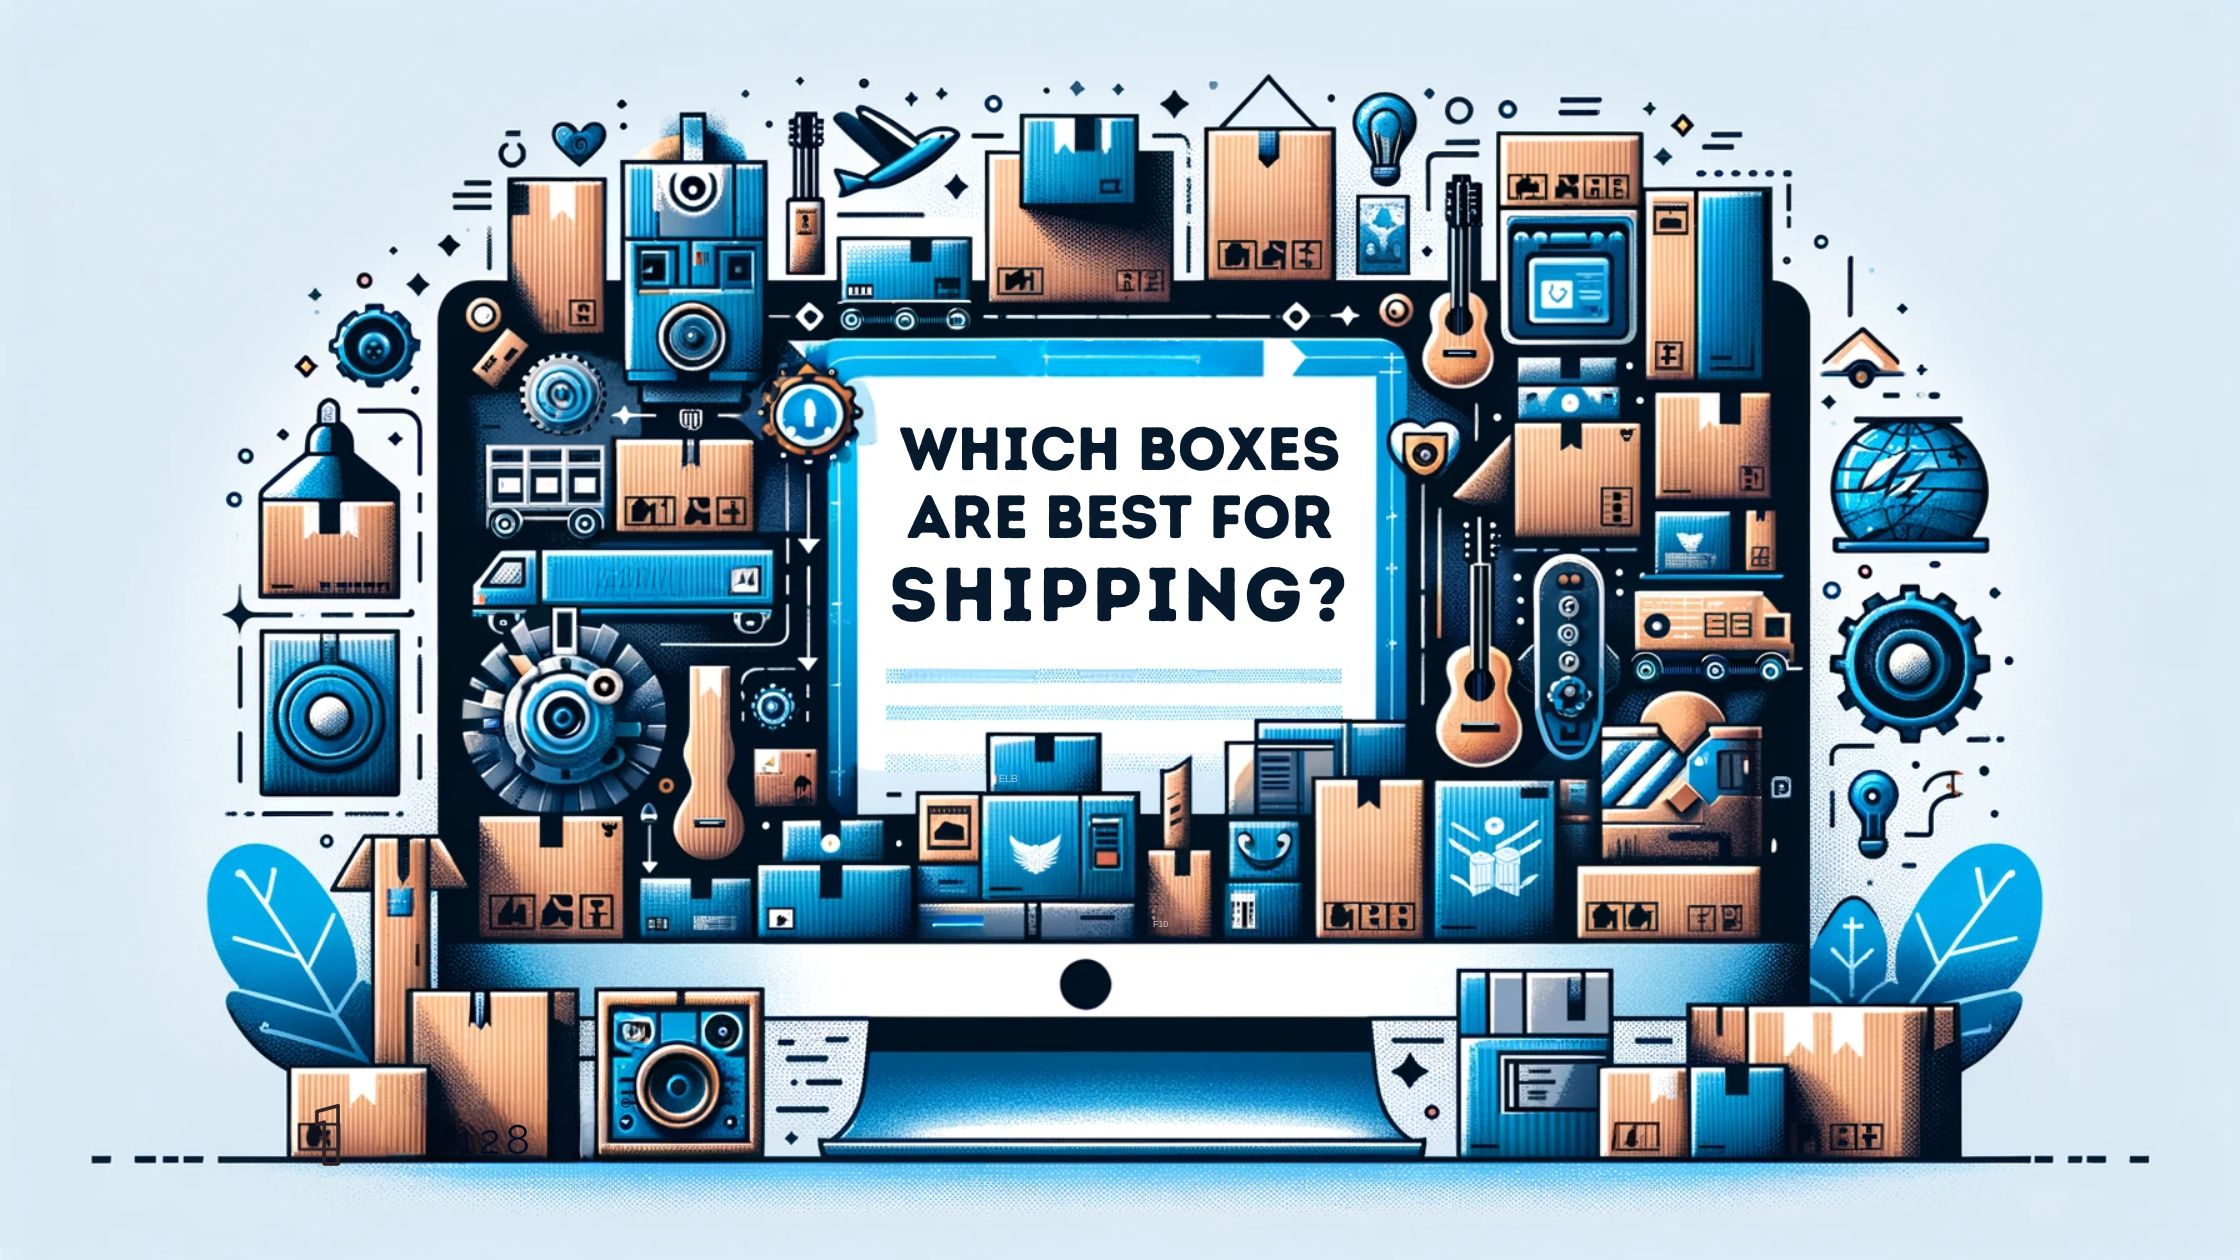 Which Boxes Are Best for Shipping?